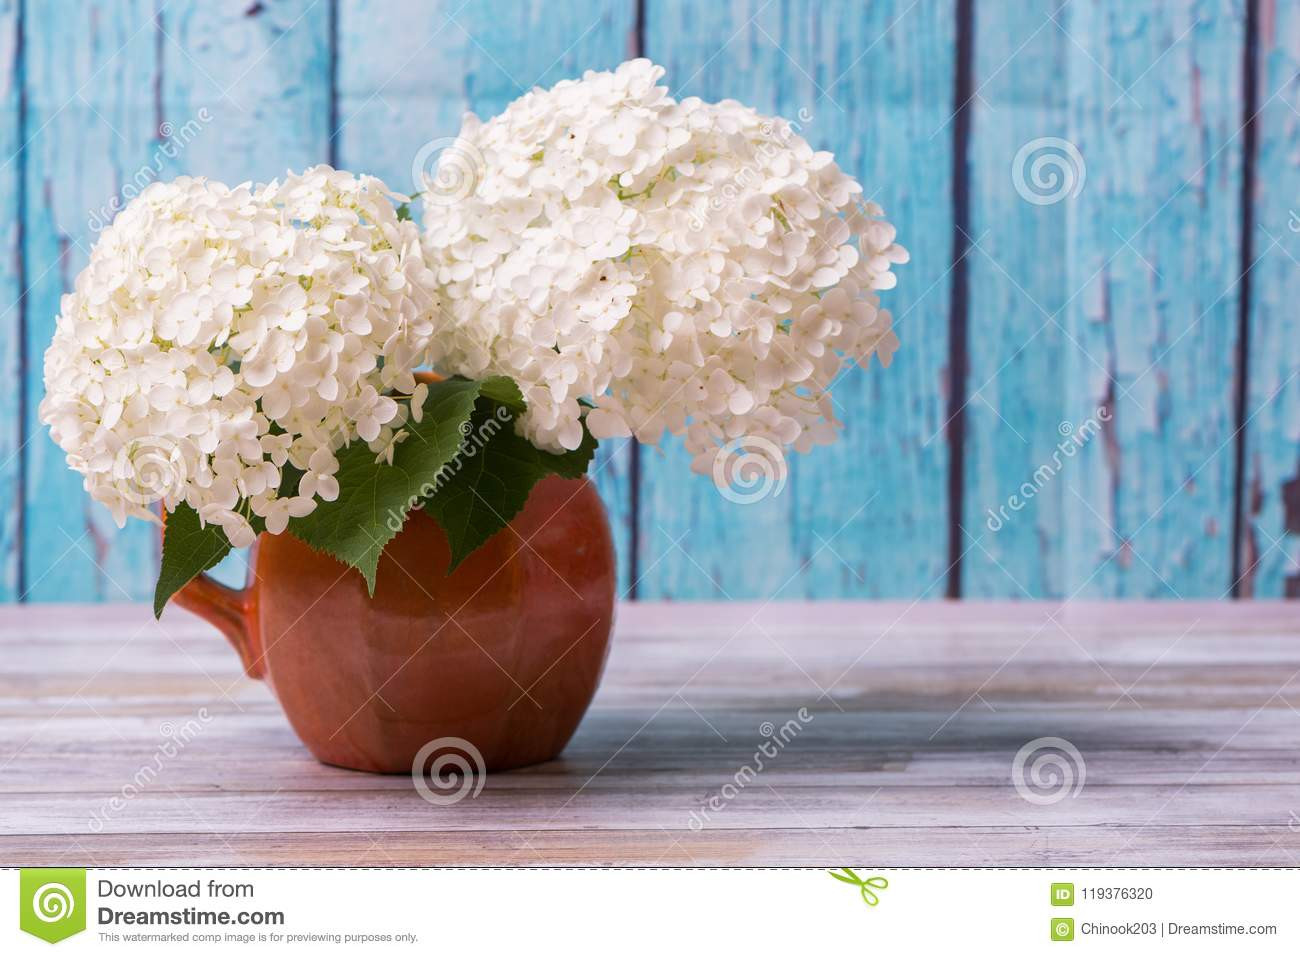 10 Nice White Pitcher Vase with Flowers 2023 free download white pitcher vase with flowers of white hydrangea flowers in a rustic vase with blue background stock intended for white hydrangea flowers in a rustic vase with blue background